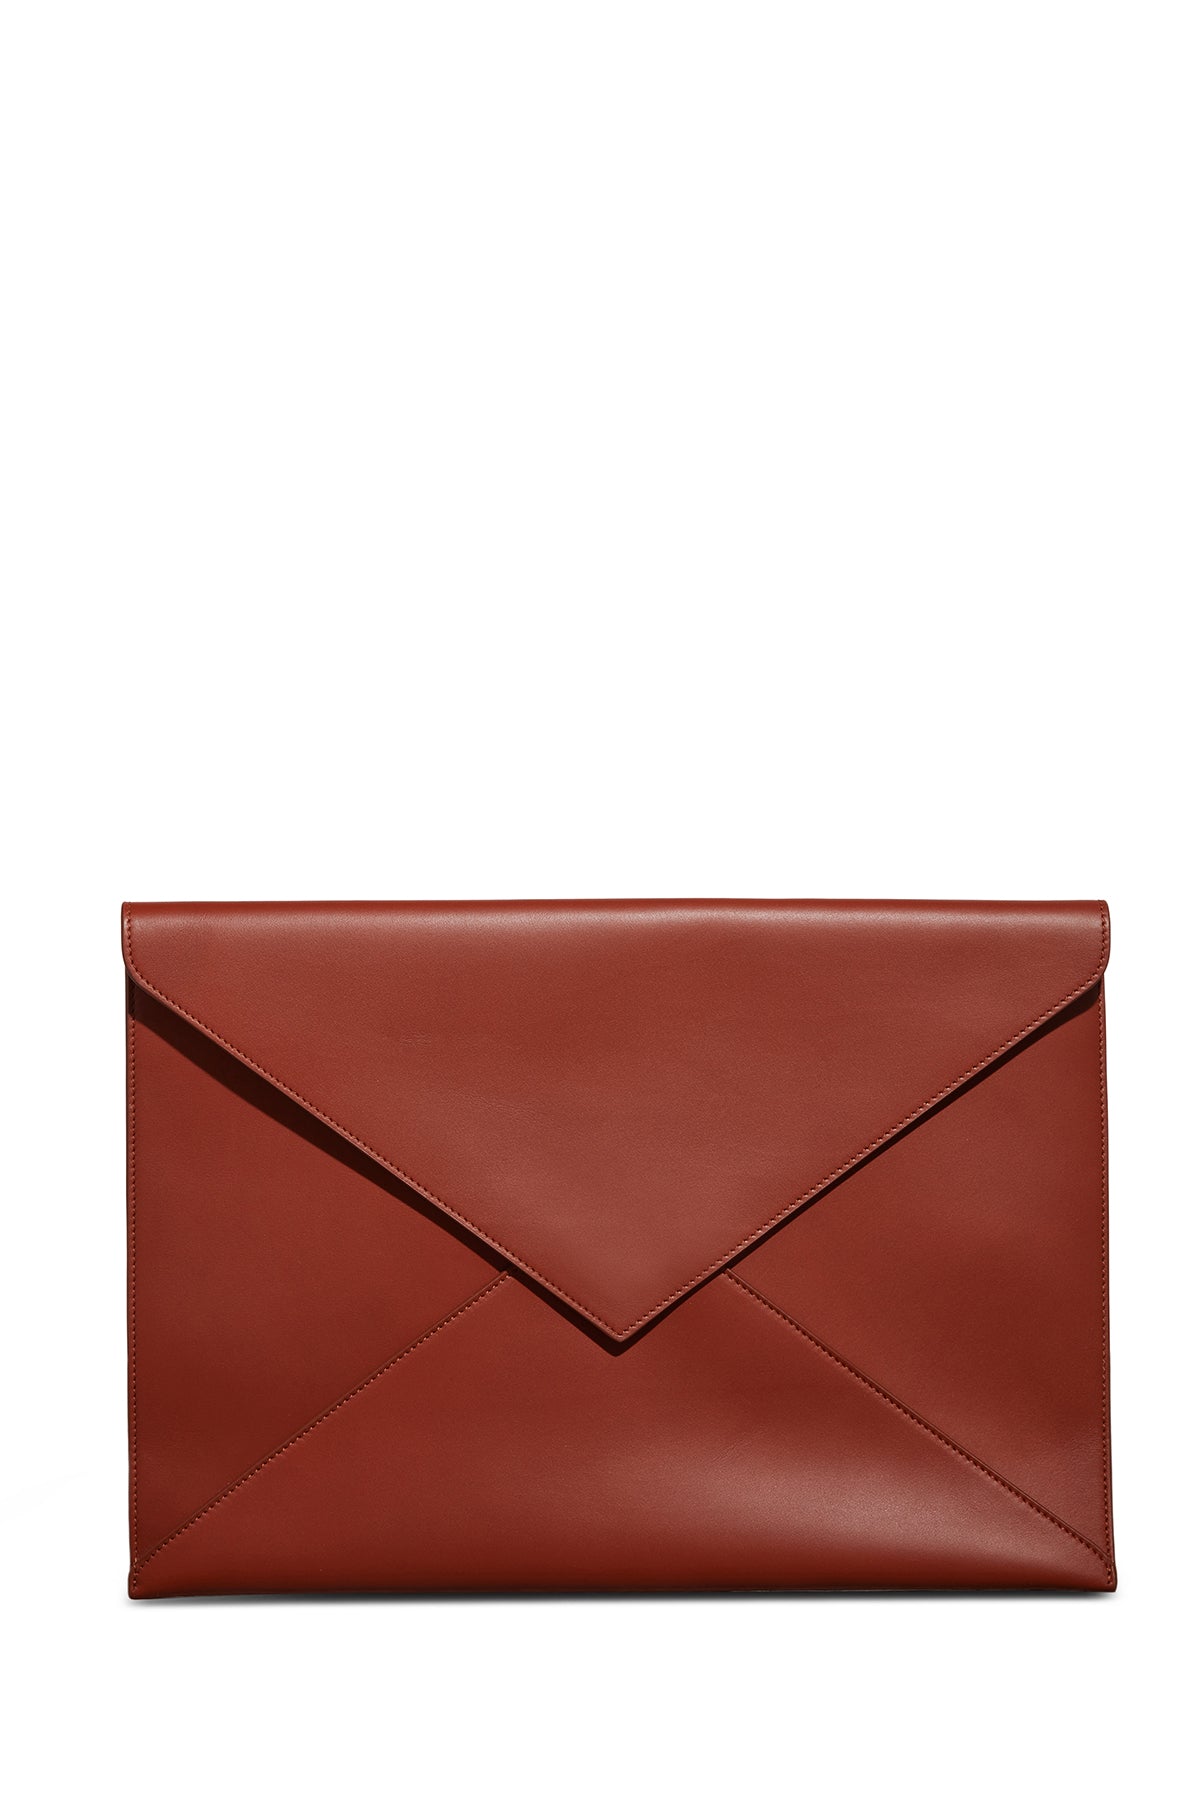 Large Envelope in Cognac Nappa Leather